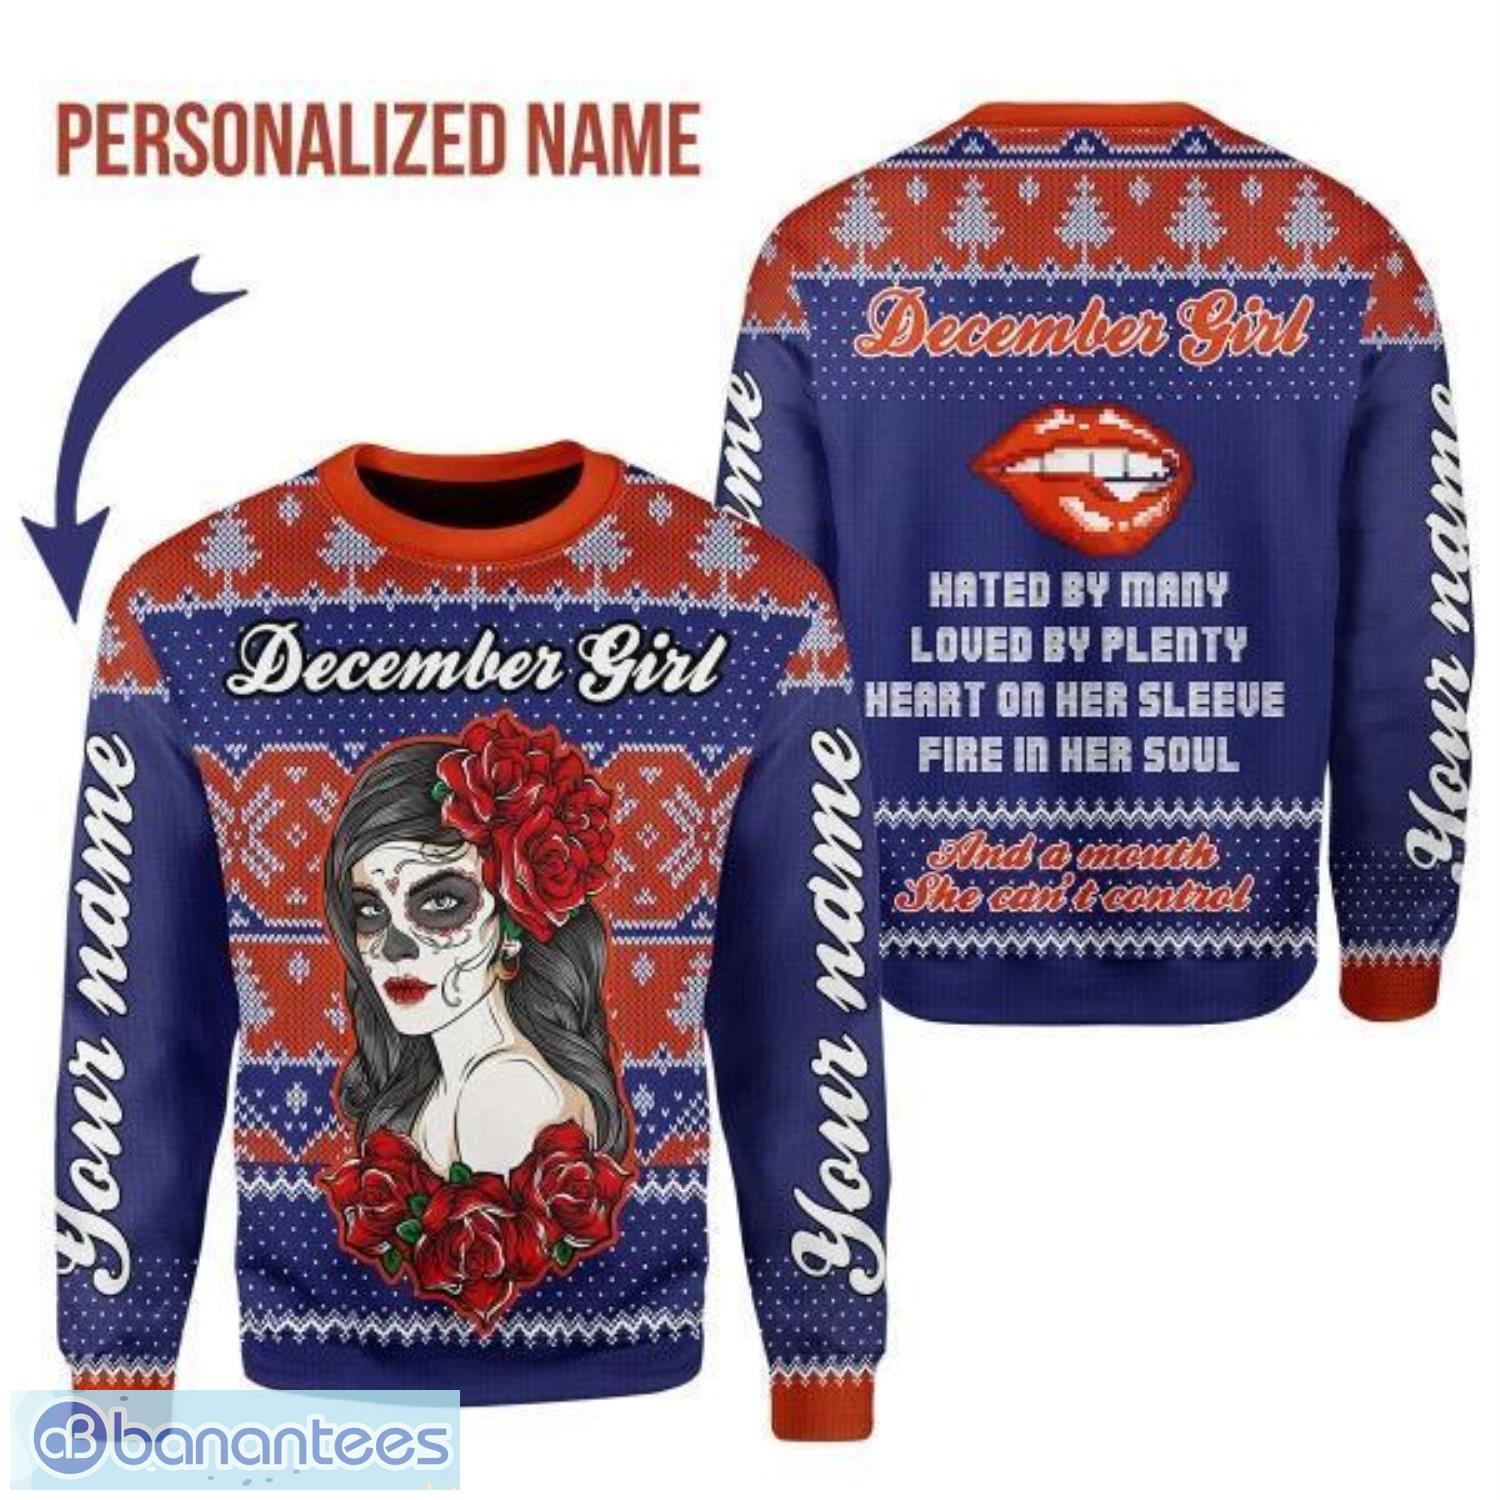 Personalized Name December Girl Hated By Many Loved By Plenty 3D Ugly Christmas Sweater Christmas Gift Product Photo 1